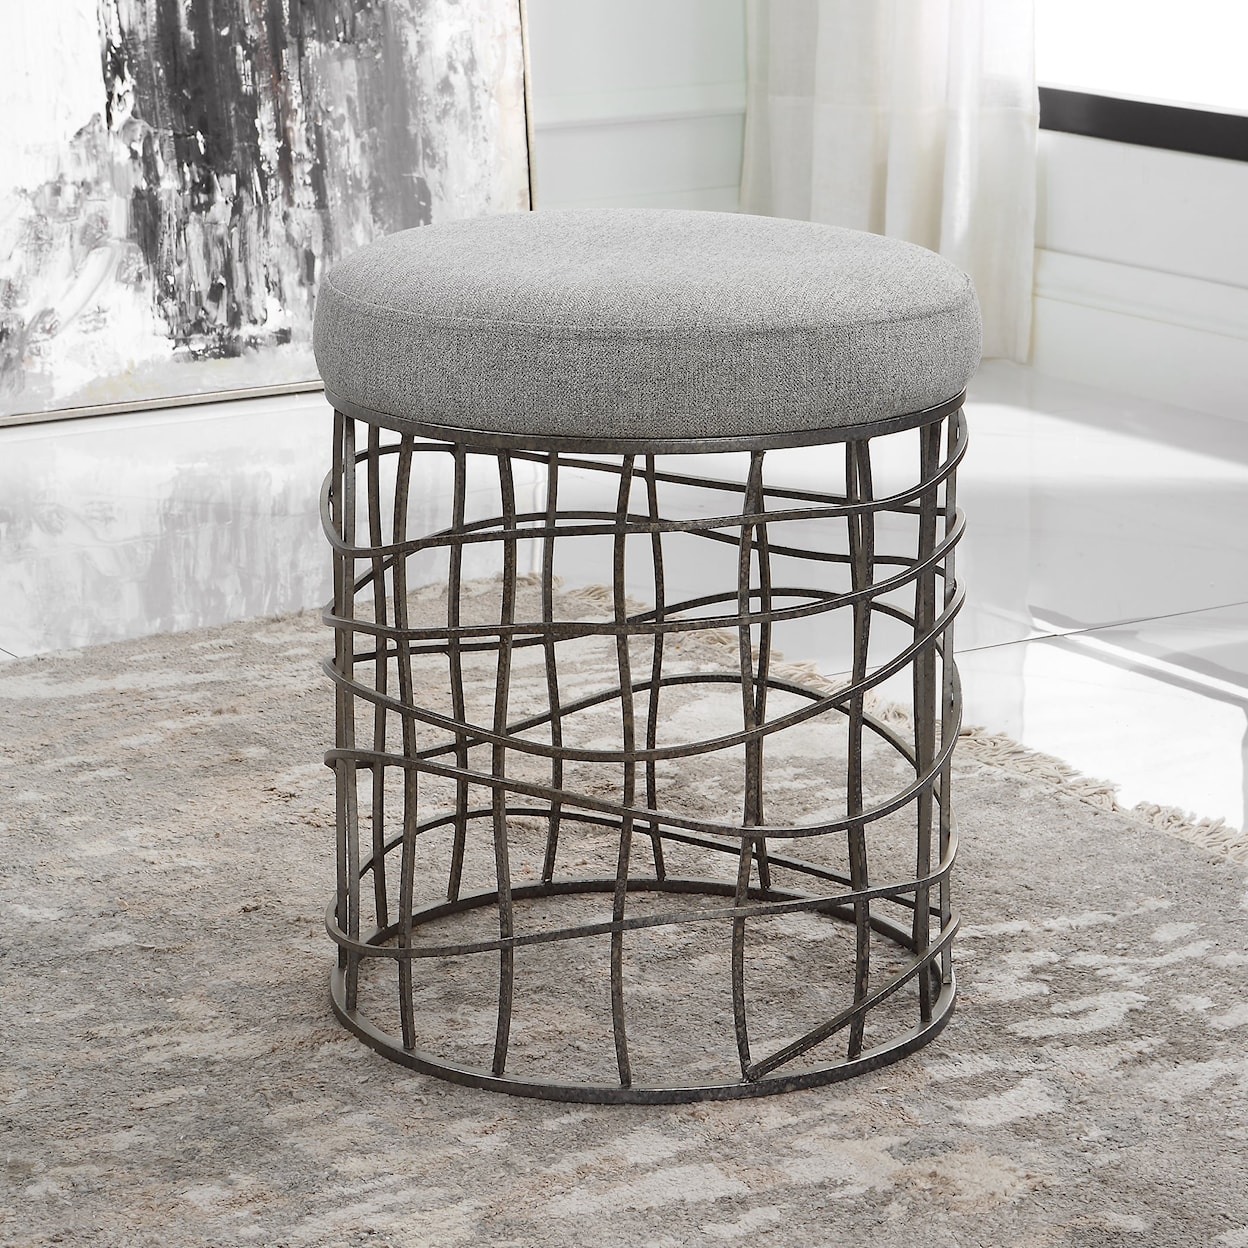 Uttermost Carnival Round Accent Stool with Upholstered Seat